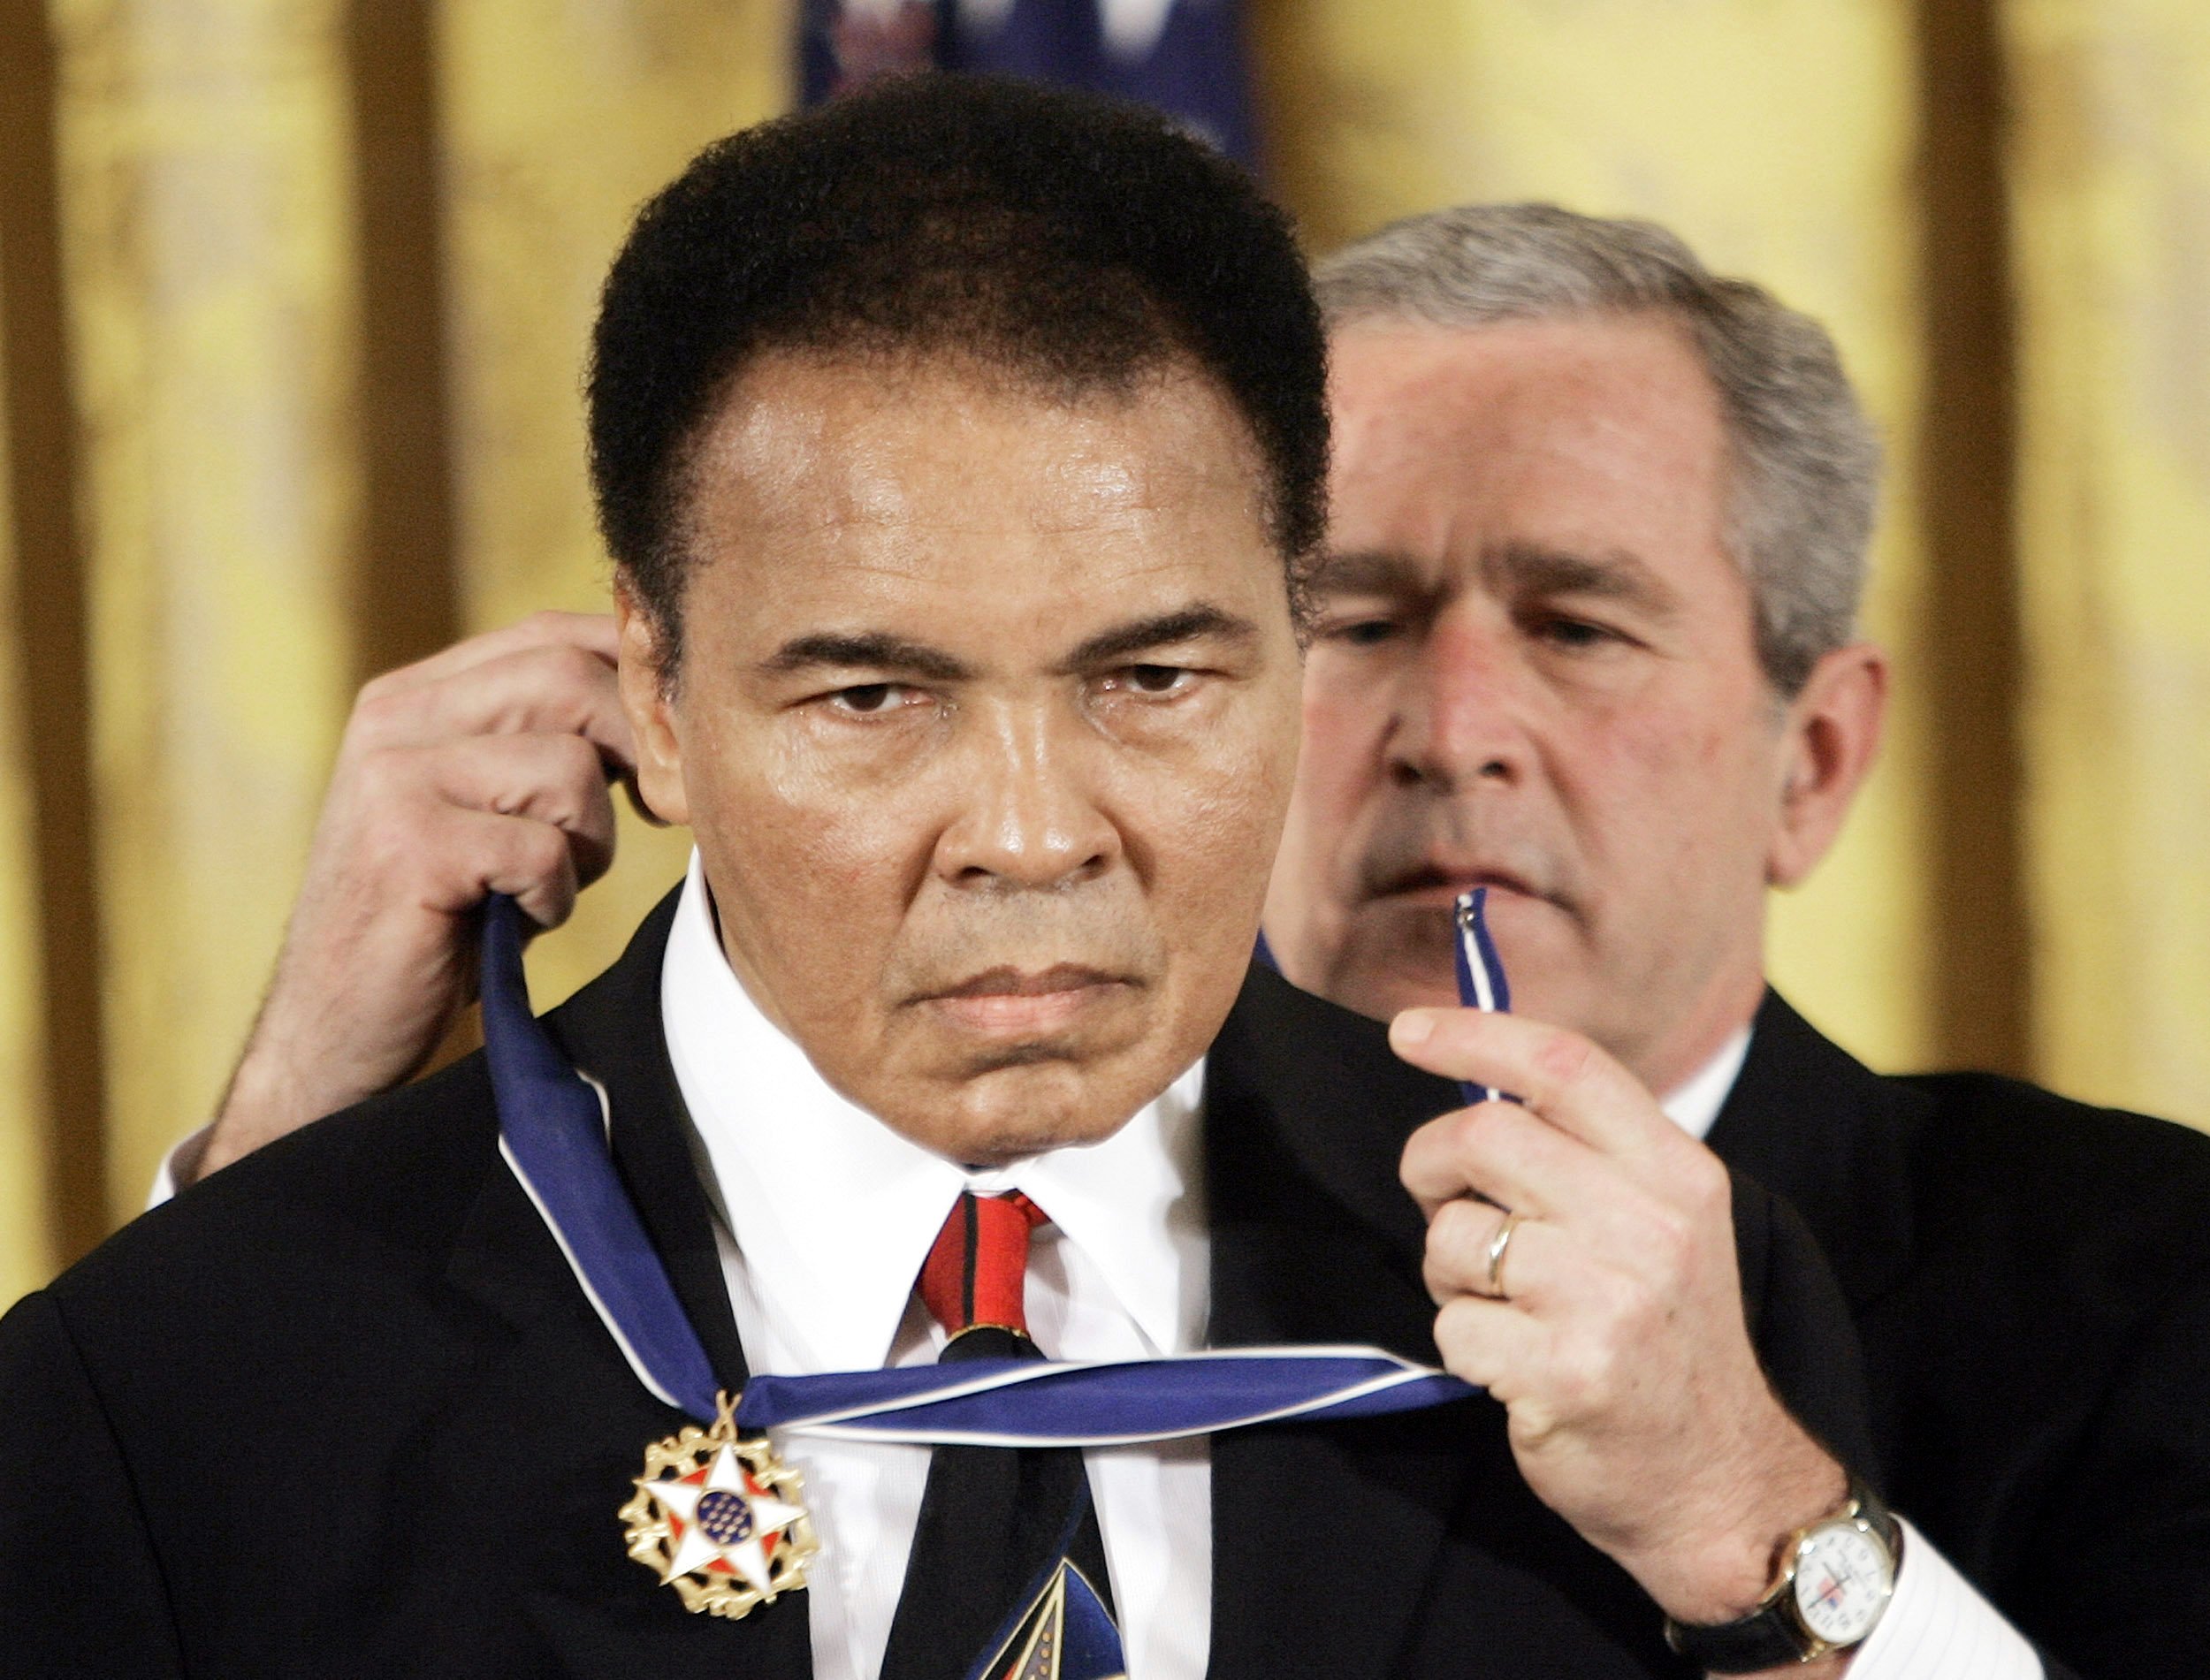 FILE - In this Nov. 9, 2005 file photo, President Bush presents the Presidential Medal of Freedom to boxer Muhammad Ali in the East Room of the White House. He is now so much a part of the nation's social fabric that it's hard to comprehend a time when Ali was more reviled than revered.   (AP Photo/Evan Vucci, File)